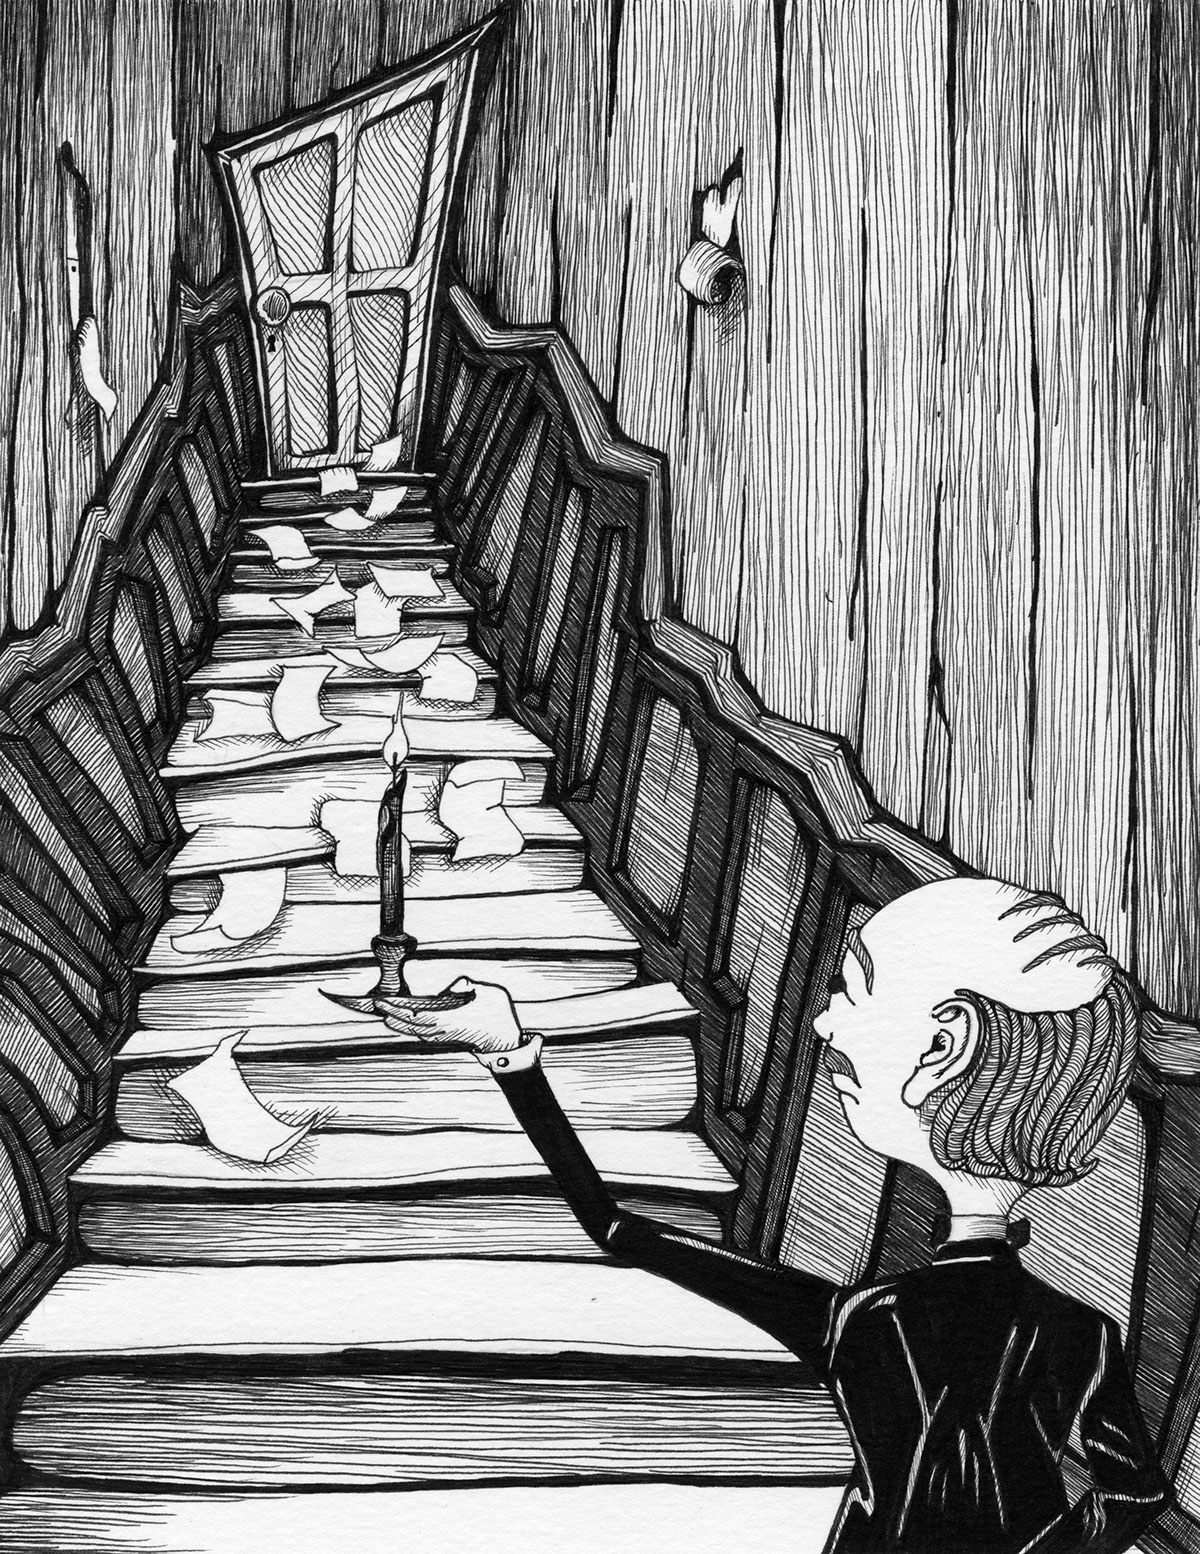 Adobe Portfolio Dr. Jekyll Mr. Hyde robert louis stevenson book illustration Editorial Illustration Dr.Jekyll & Mr.Hyde stairs butler Candlelight eerie creepy eerie stairs Pen & Ink hallway Scary